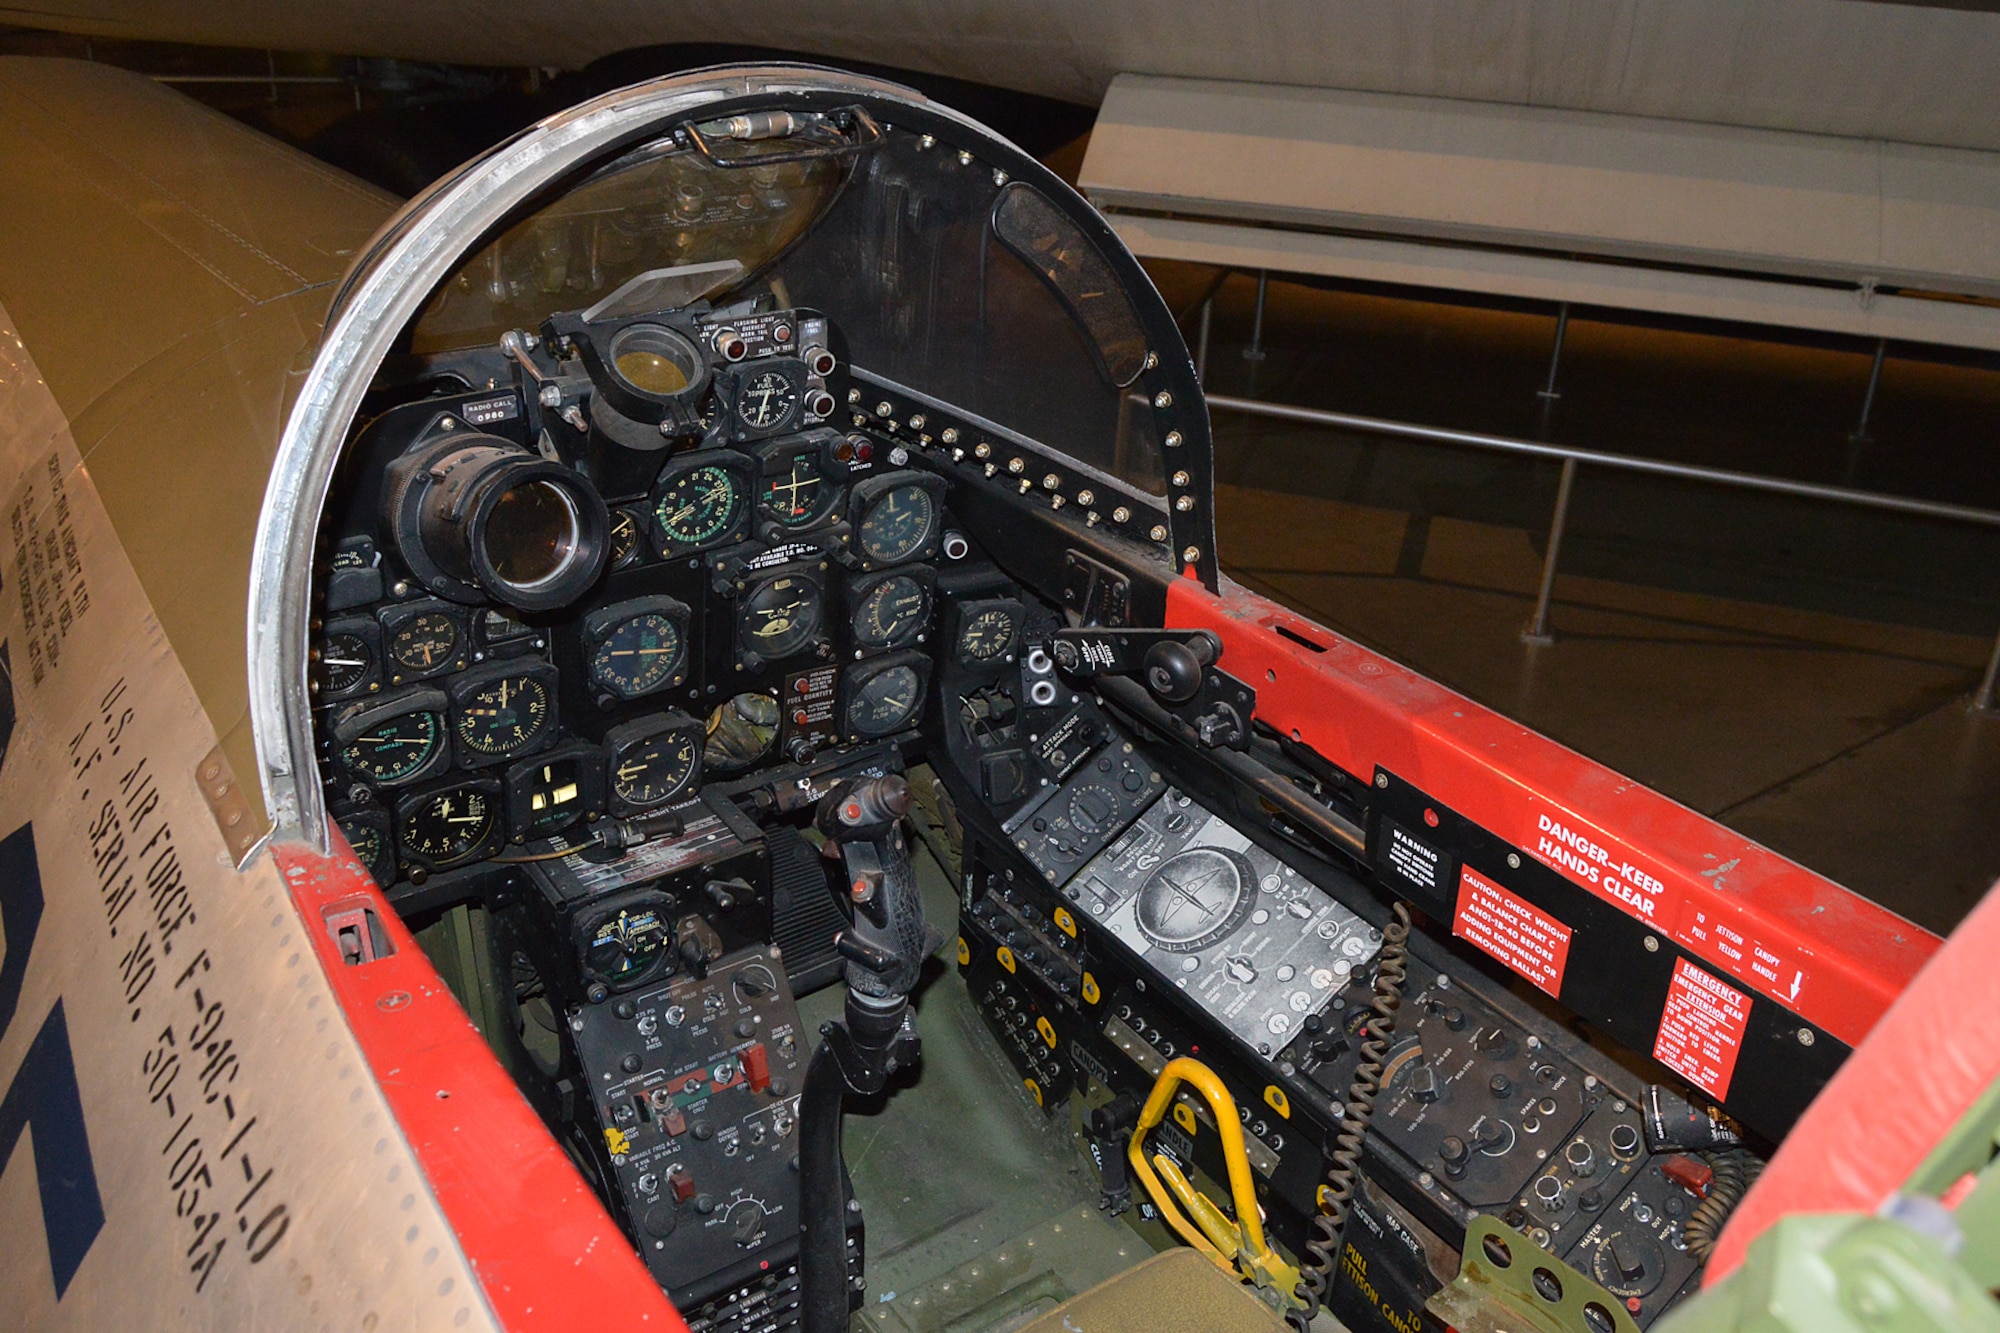 DAYTON, Ohio -- Lockheed F-94C Starfire cockpit in the Cold War Gallery at the National Museum of the United States Air Force. (U.S. Air Force photo)